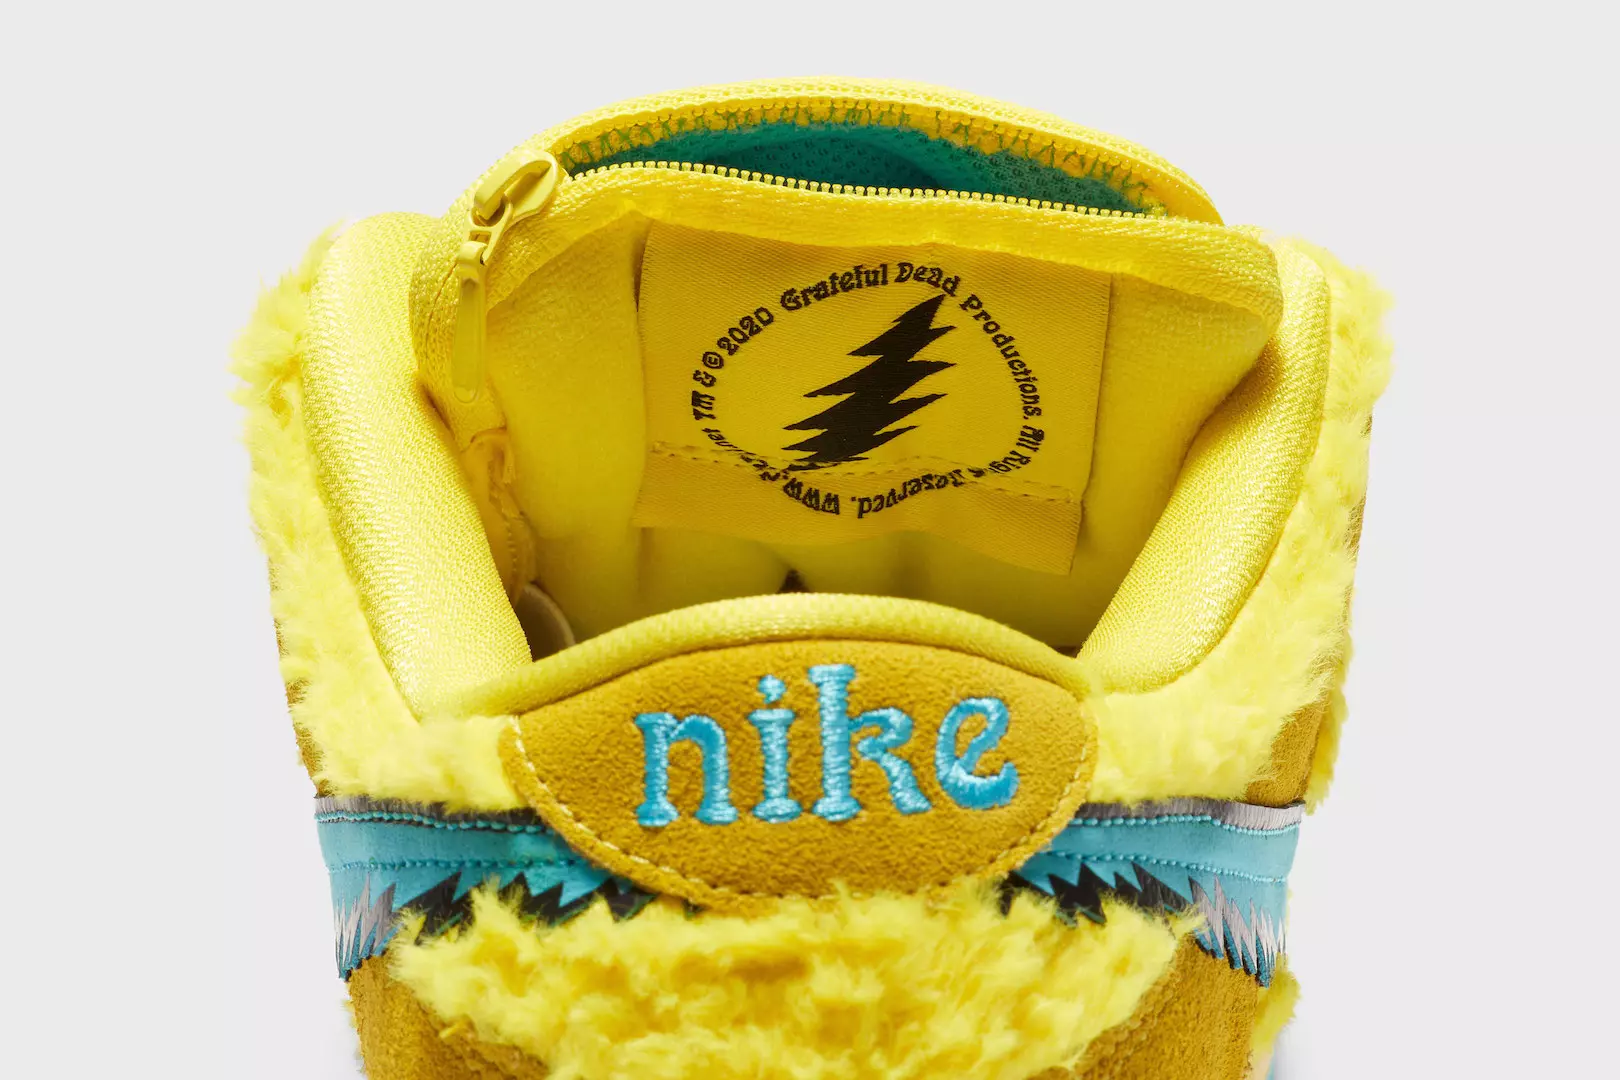 Nike's New Grateful Dead Sneakers Have a Hidden Pouch (For Weed?)